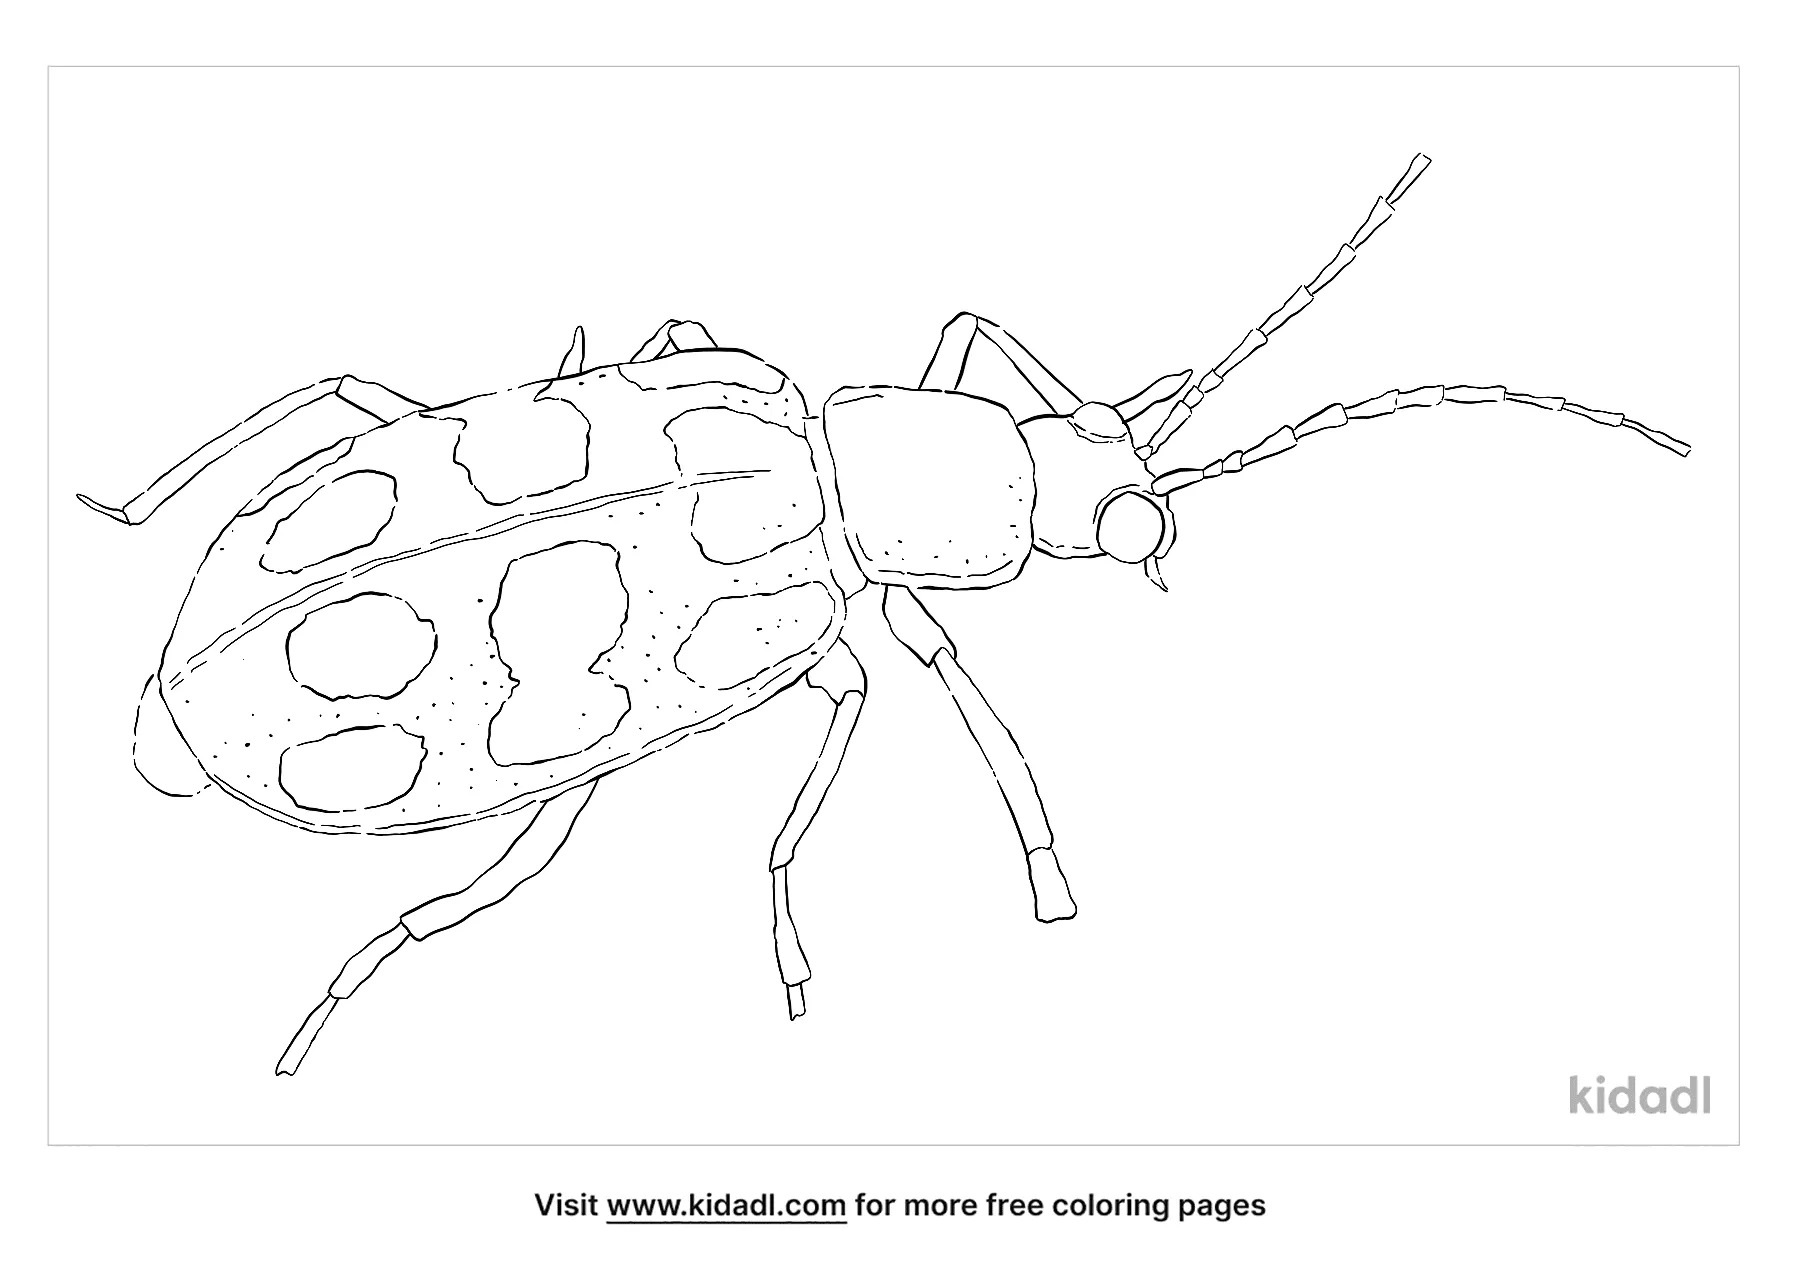 Spotted Cucumber Beetle Coloring Page